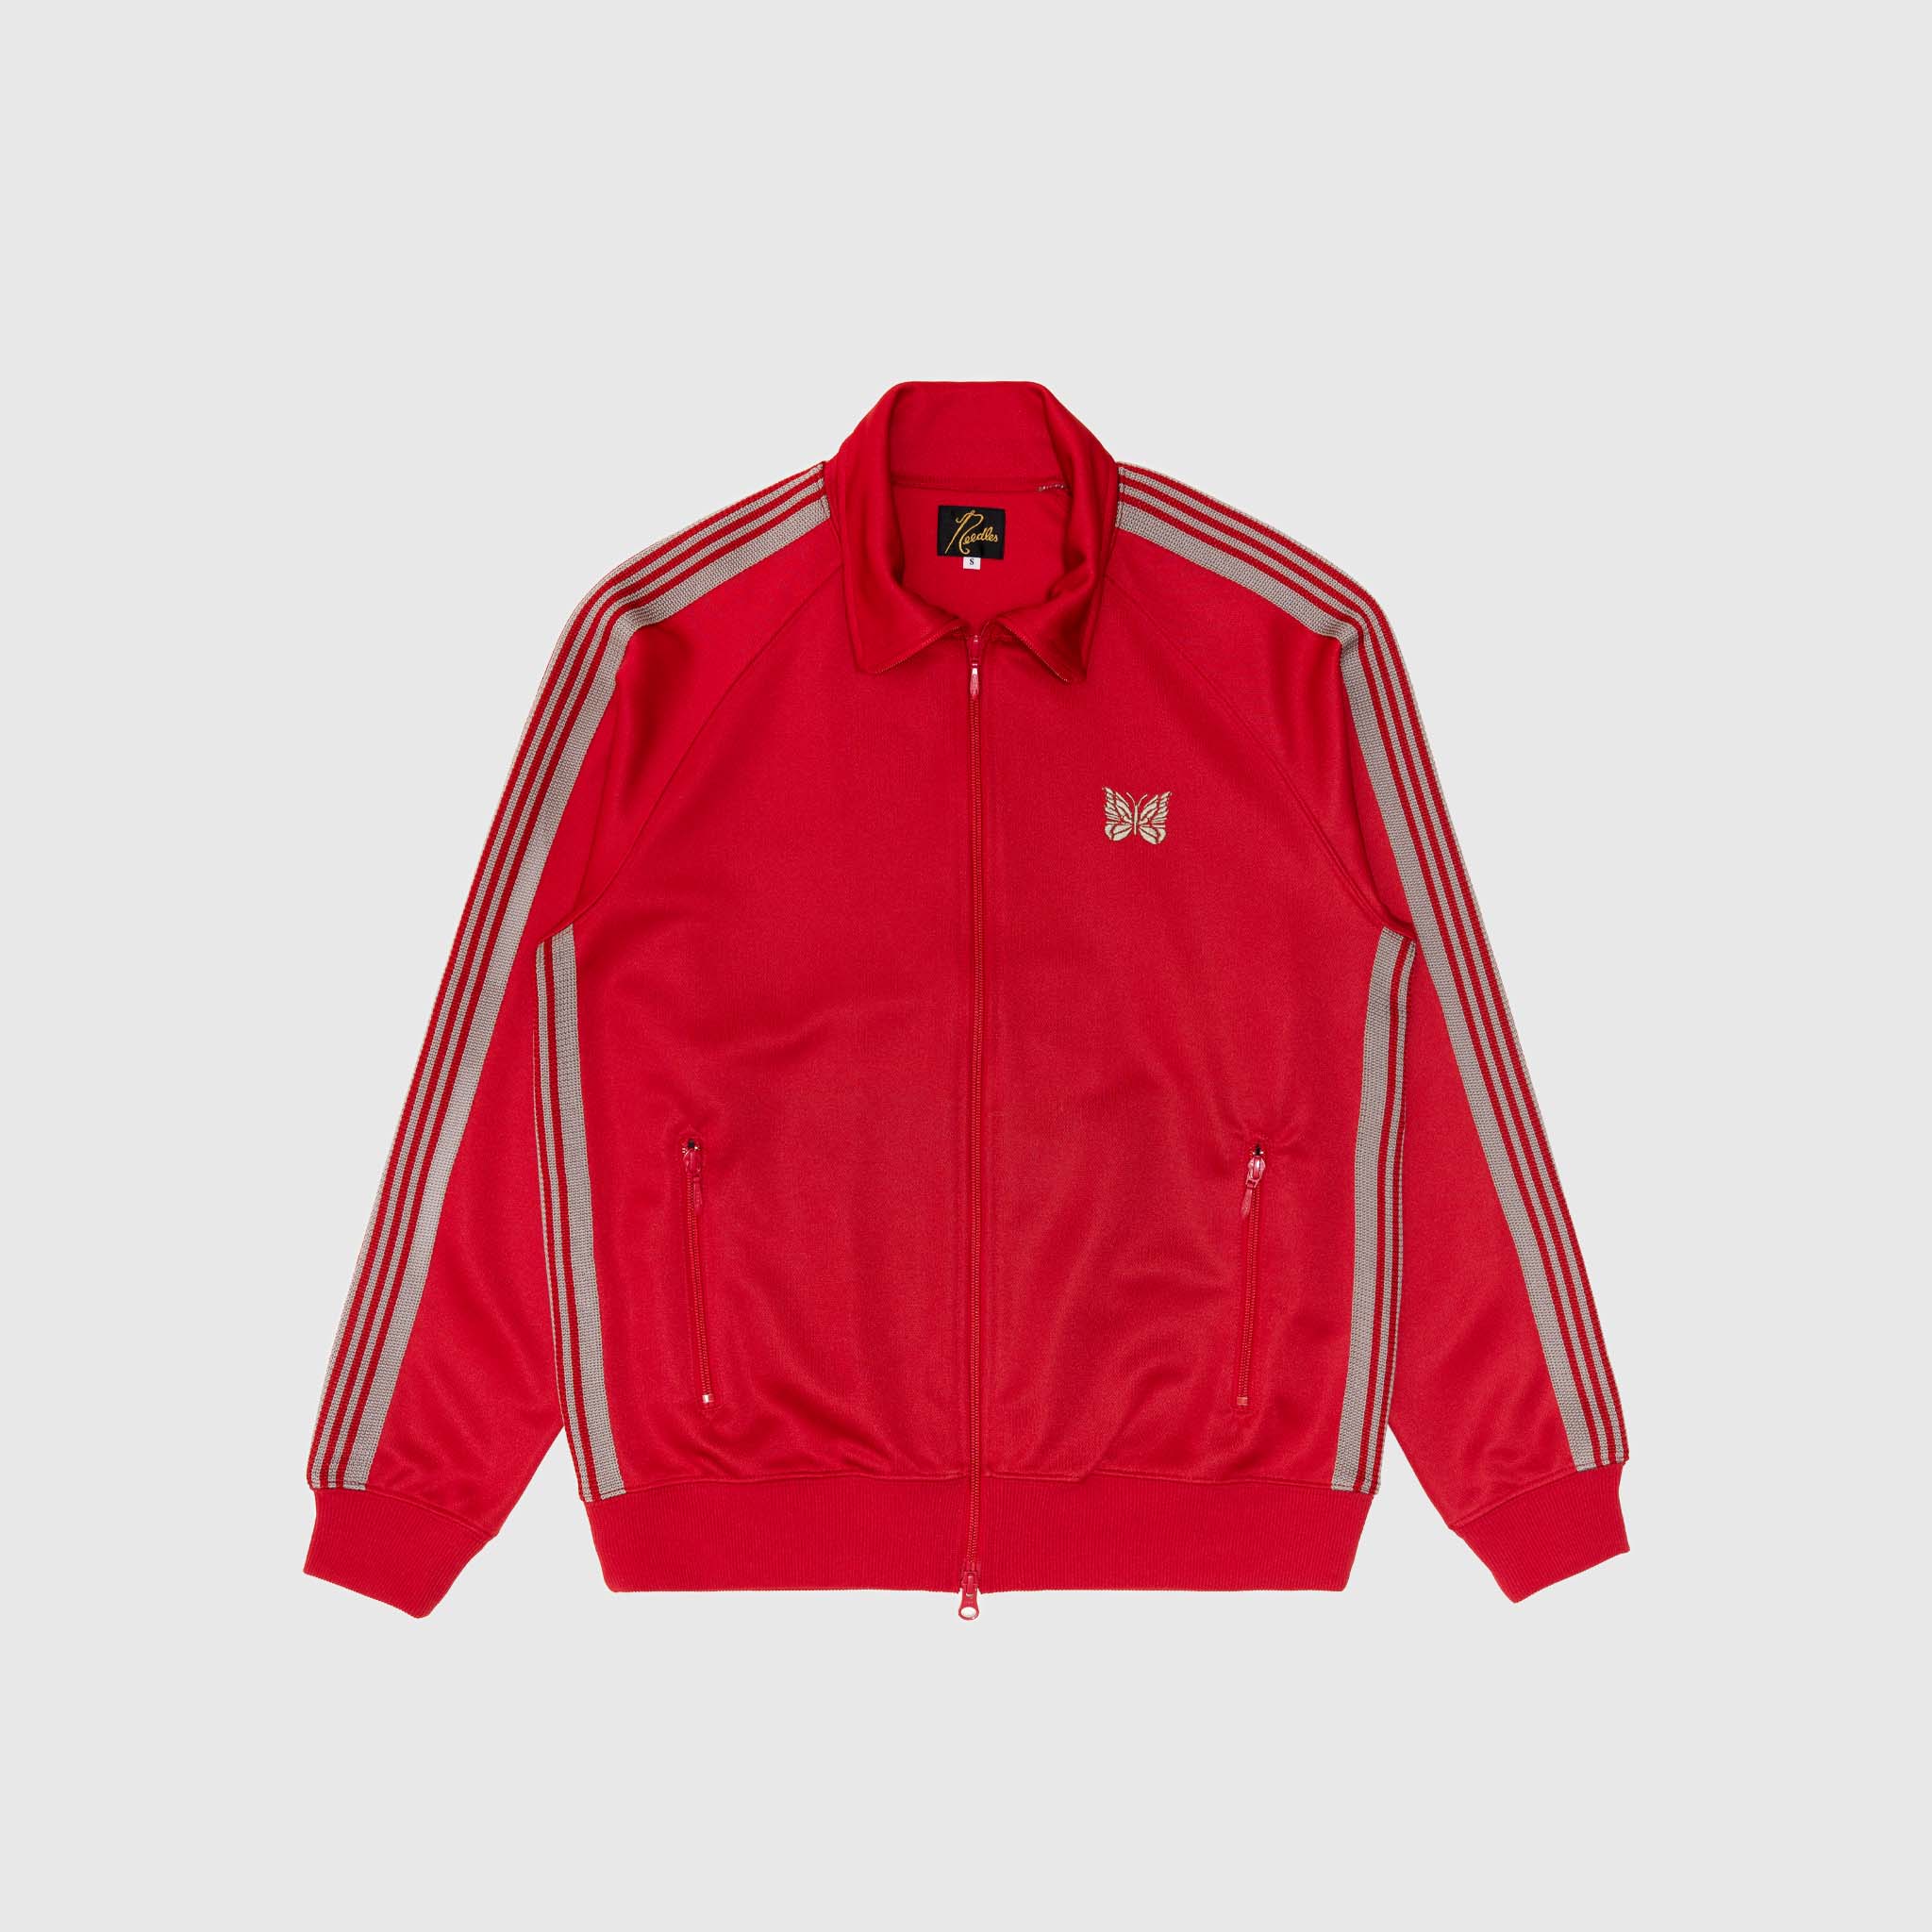 TRACK JACKET – PACKER SHOES